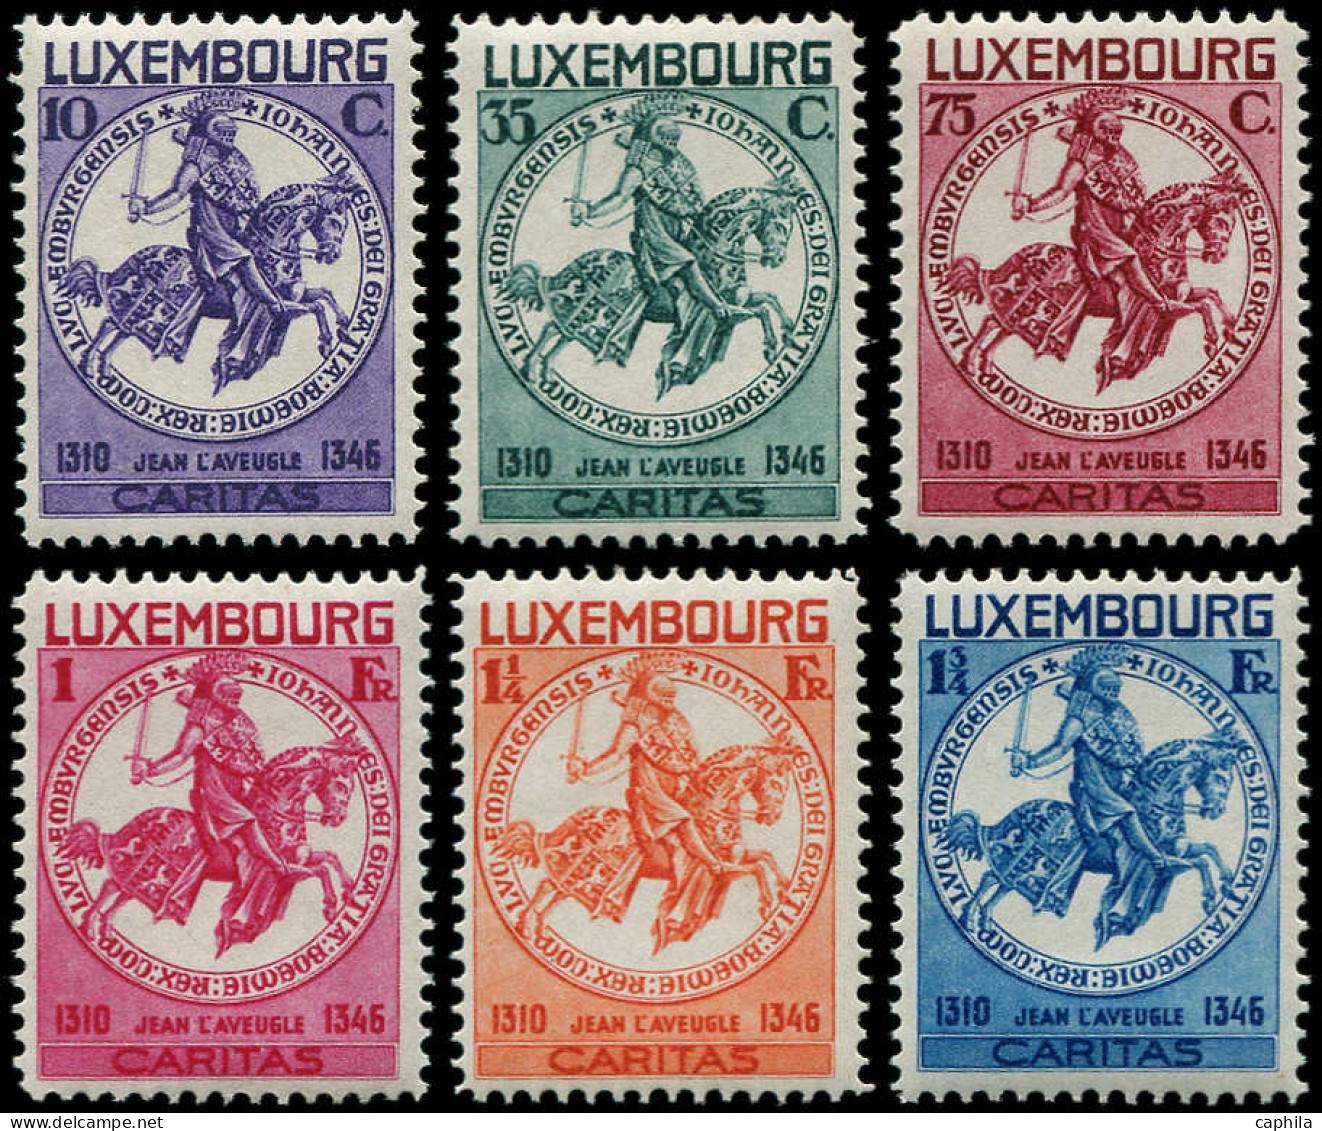 ** LUXEMBOURG - Poste - 252/57, Complet: Cheval - Ungebraucht